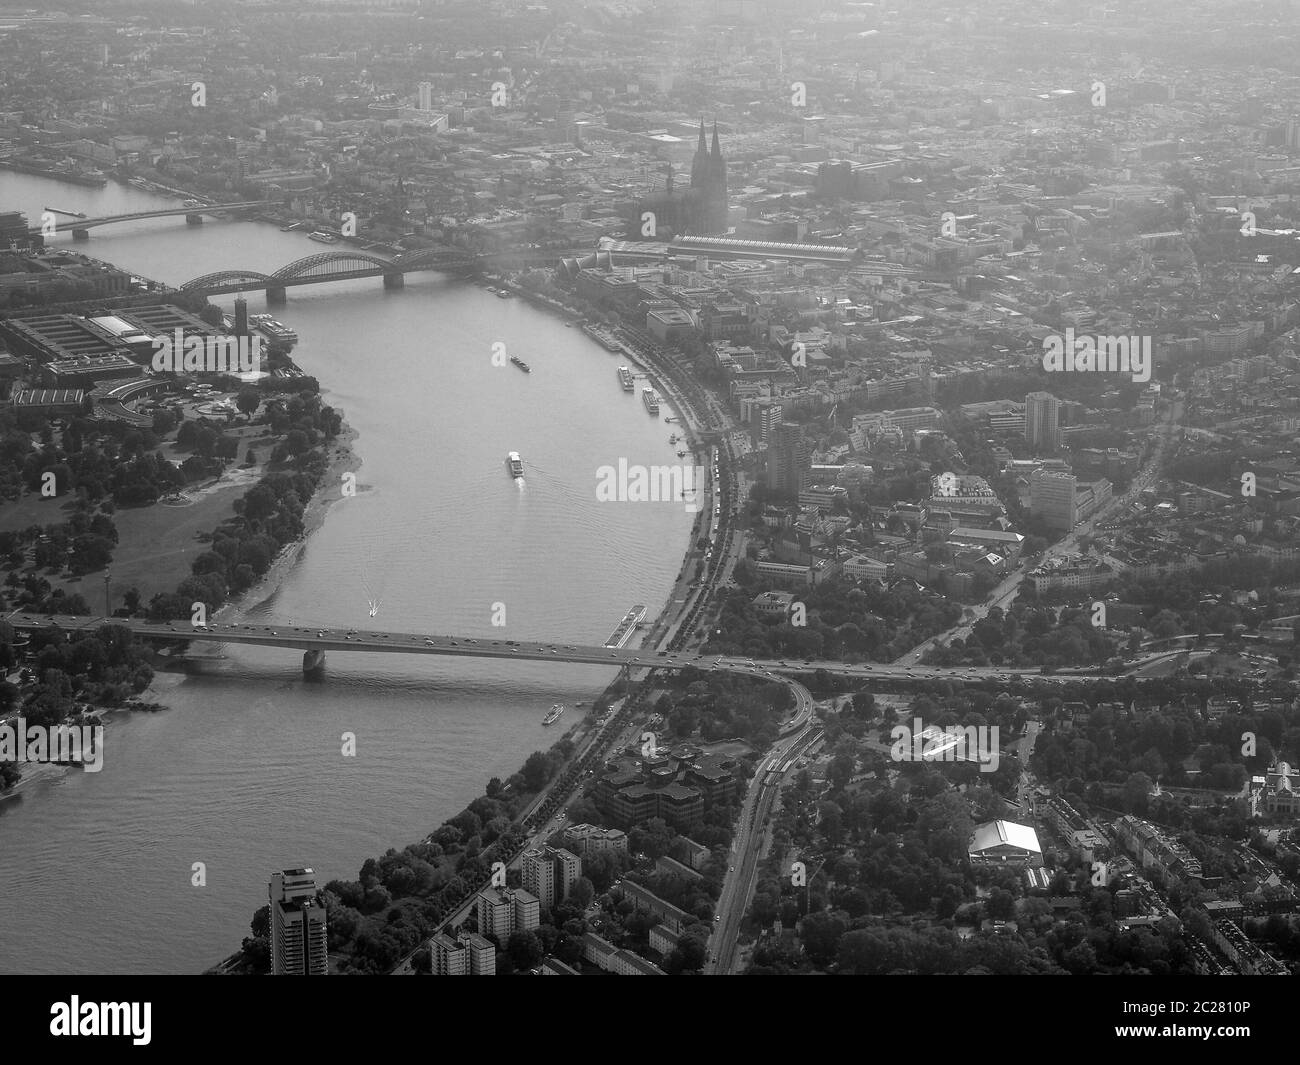 Aerial view of the city of Koeln, Germany in black and white Stock Photo